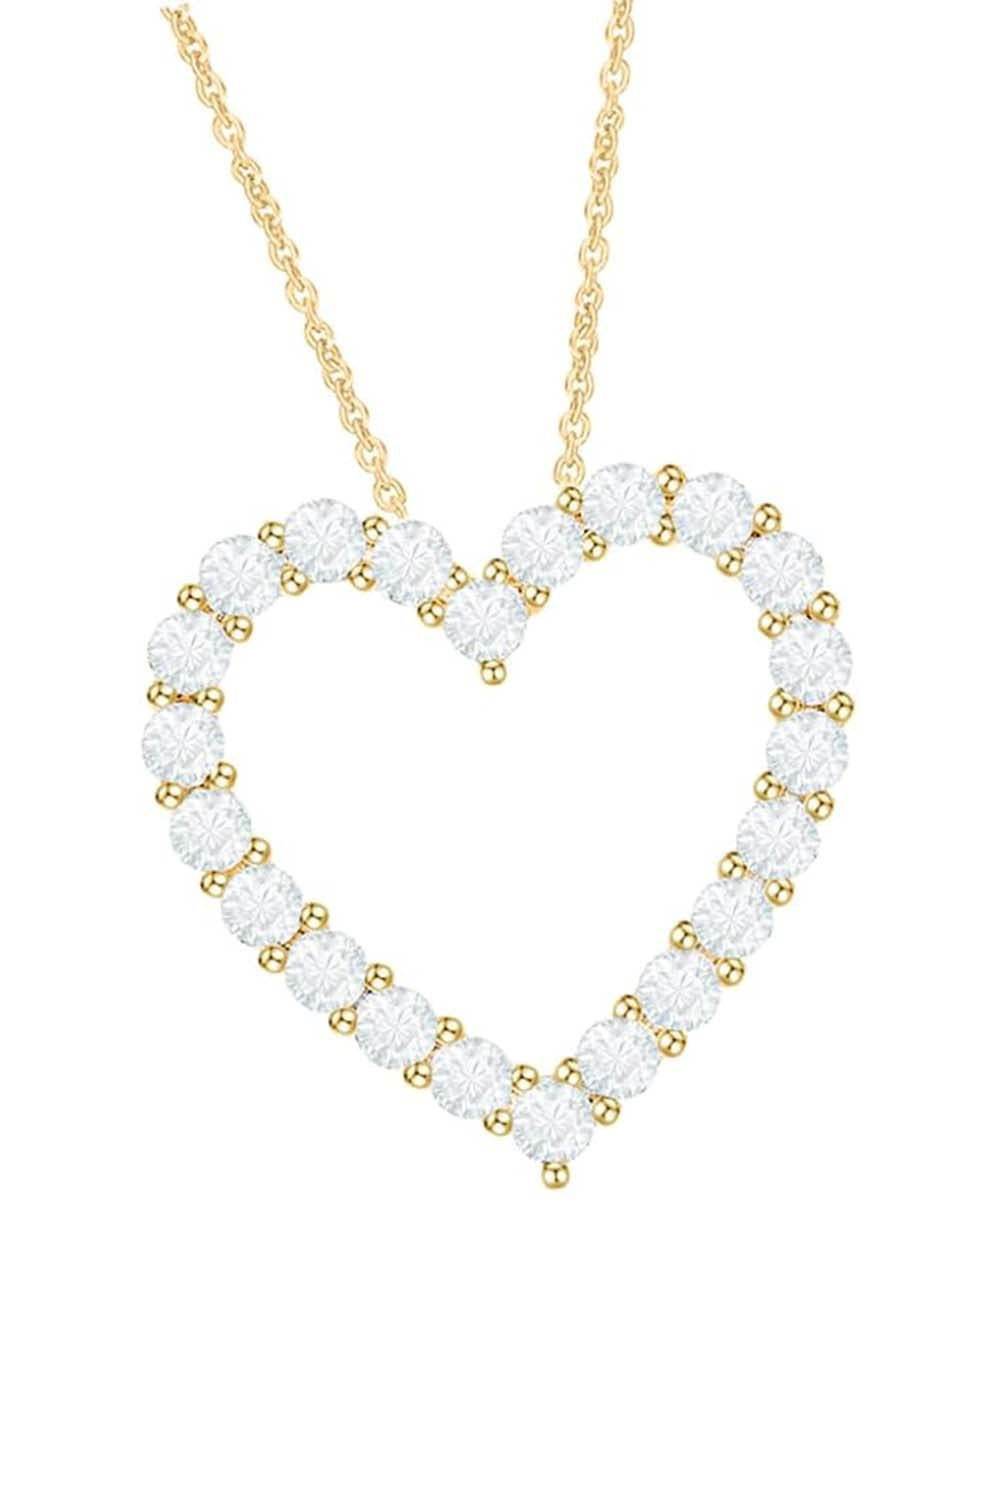 Yellow Gold Color Moissanite Heart Necklace, Heart Pendant Necklace 